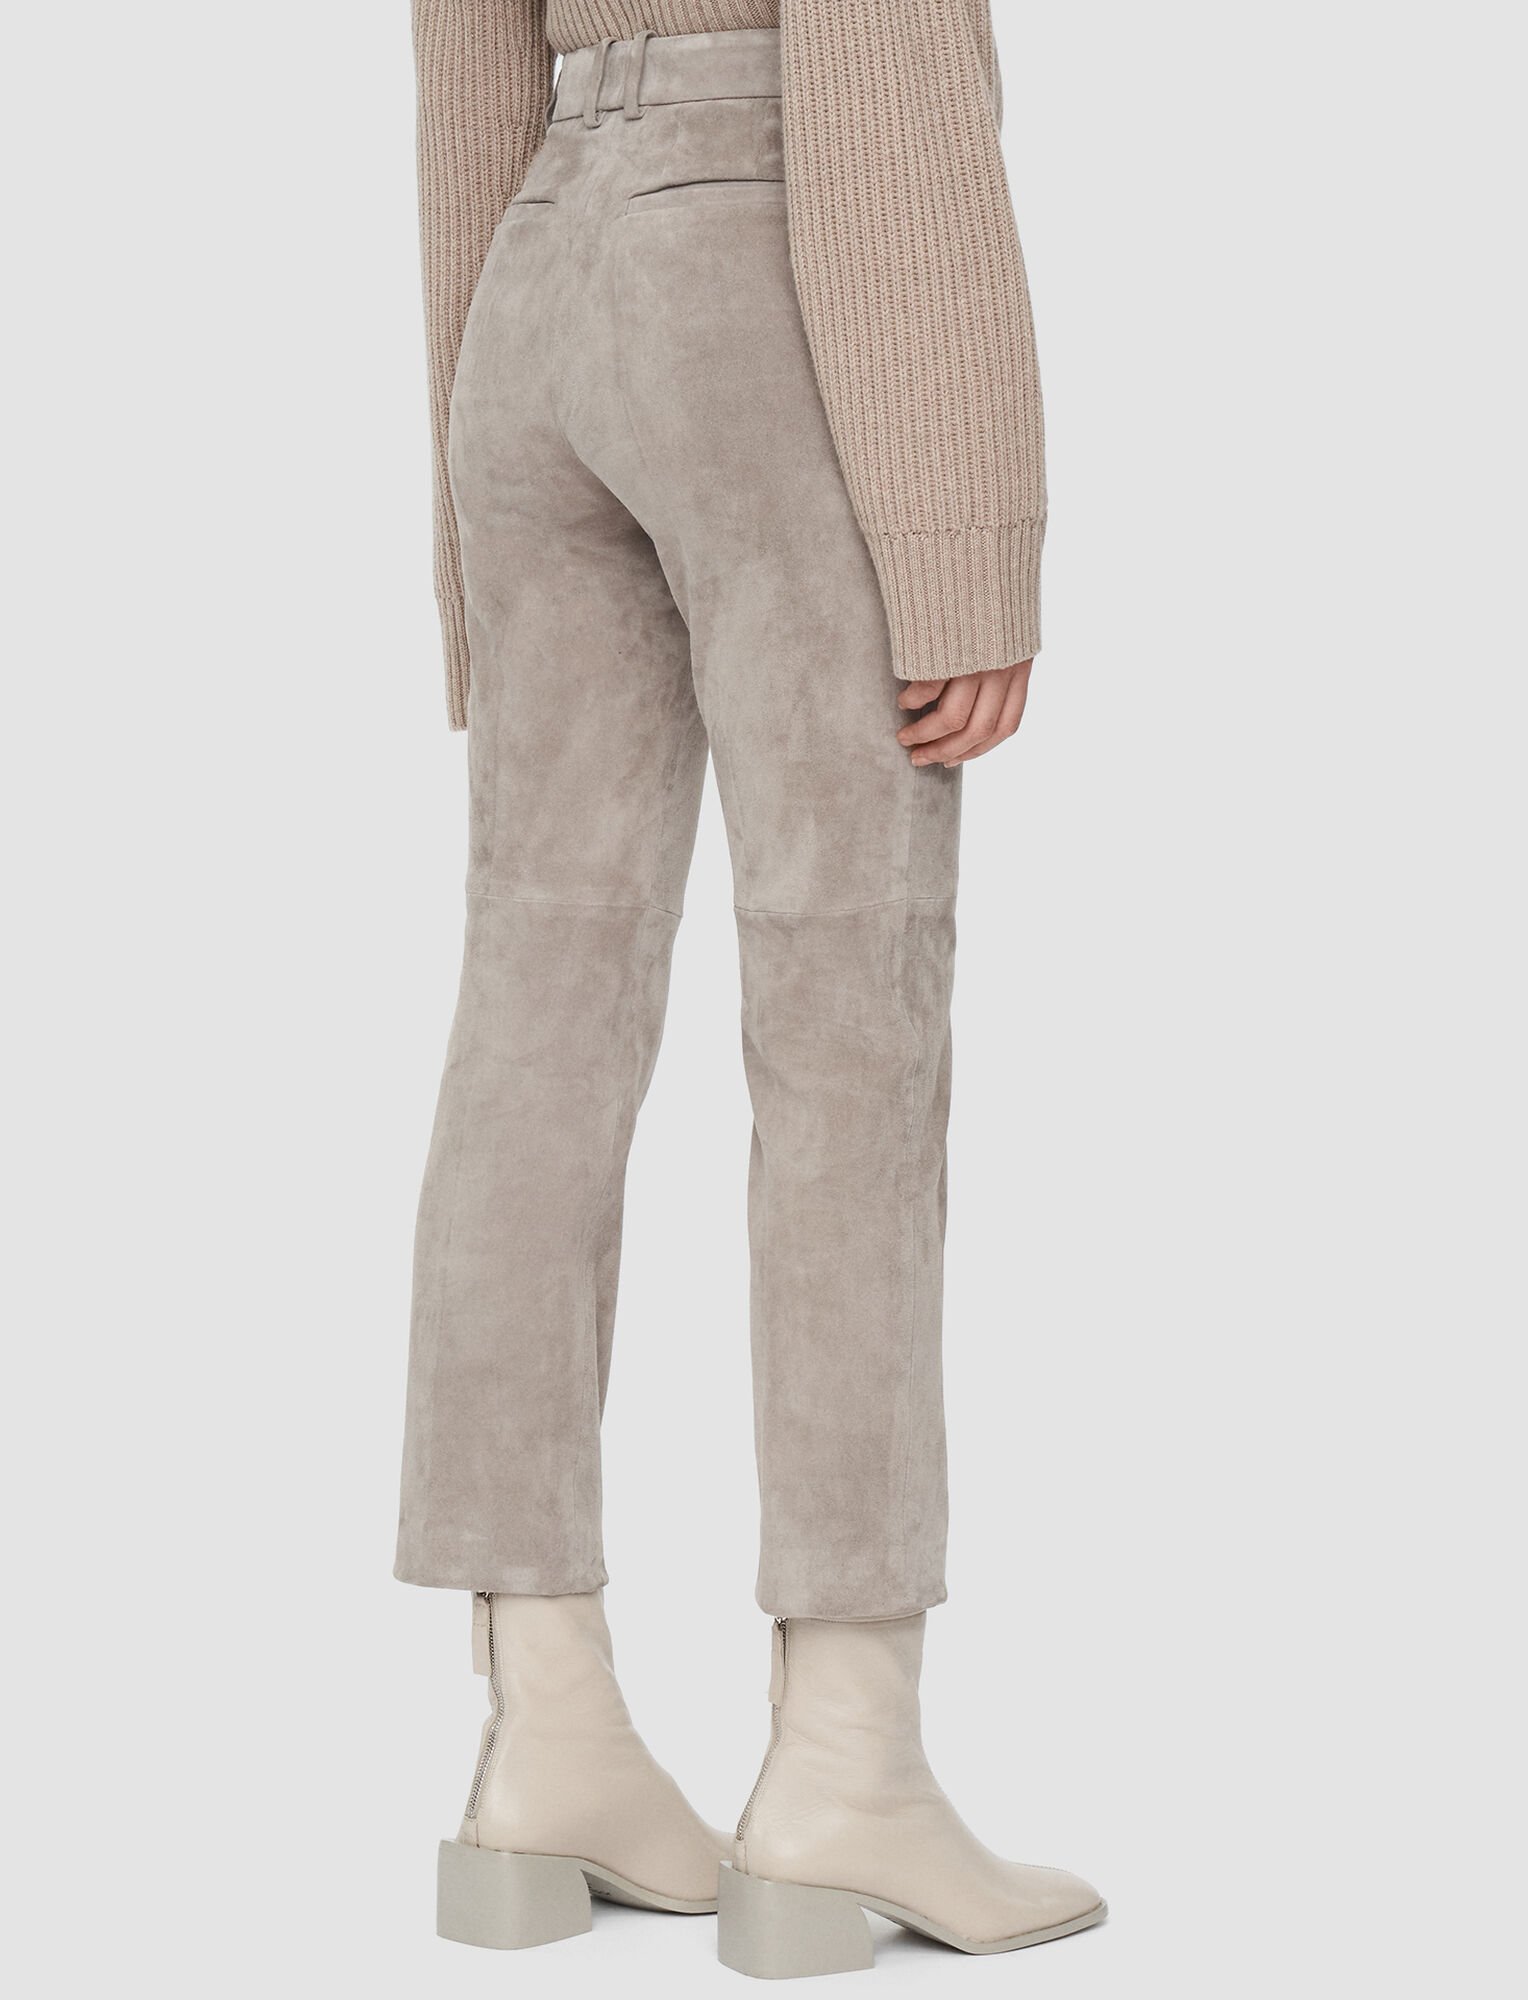 Joseph, Suede Stretch Coleman Trousers, in Cobble Stone